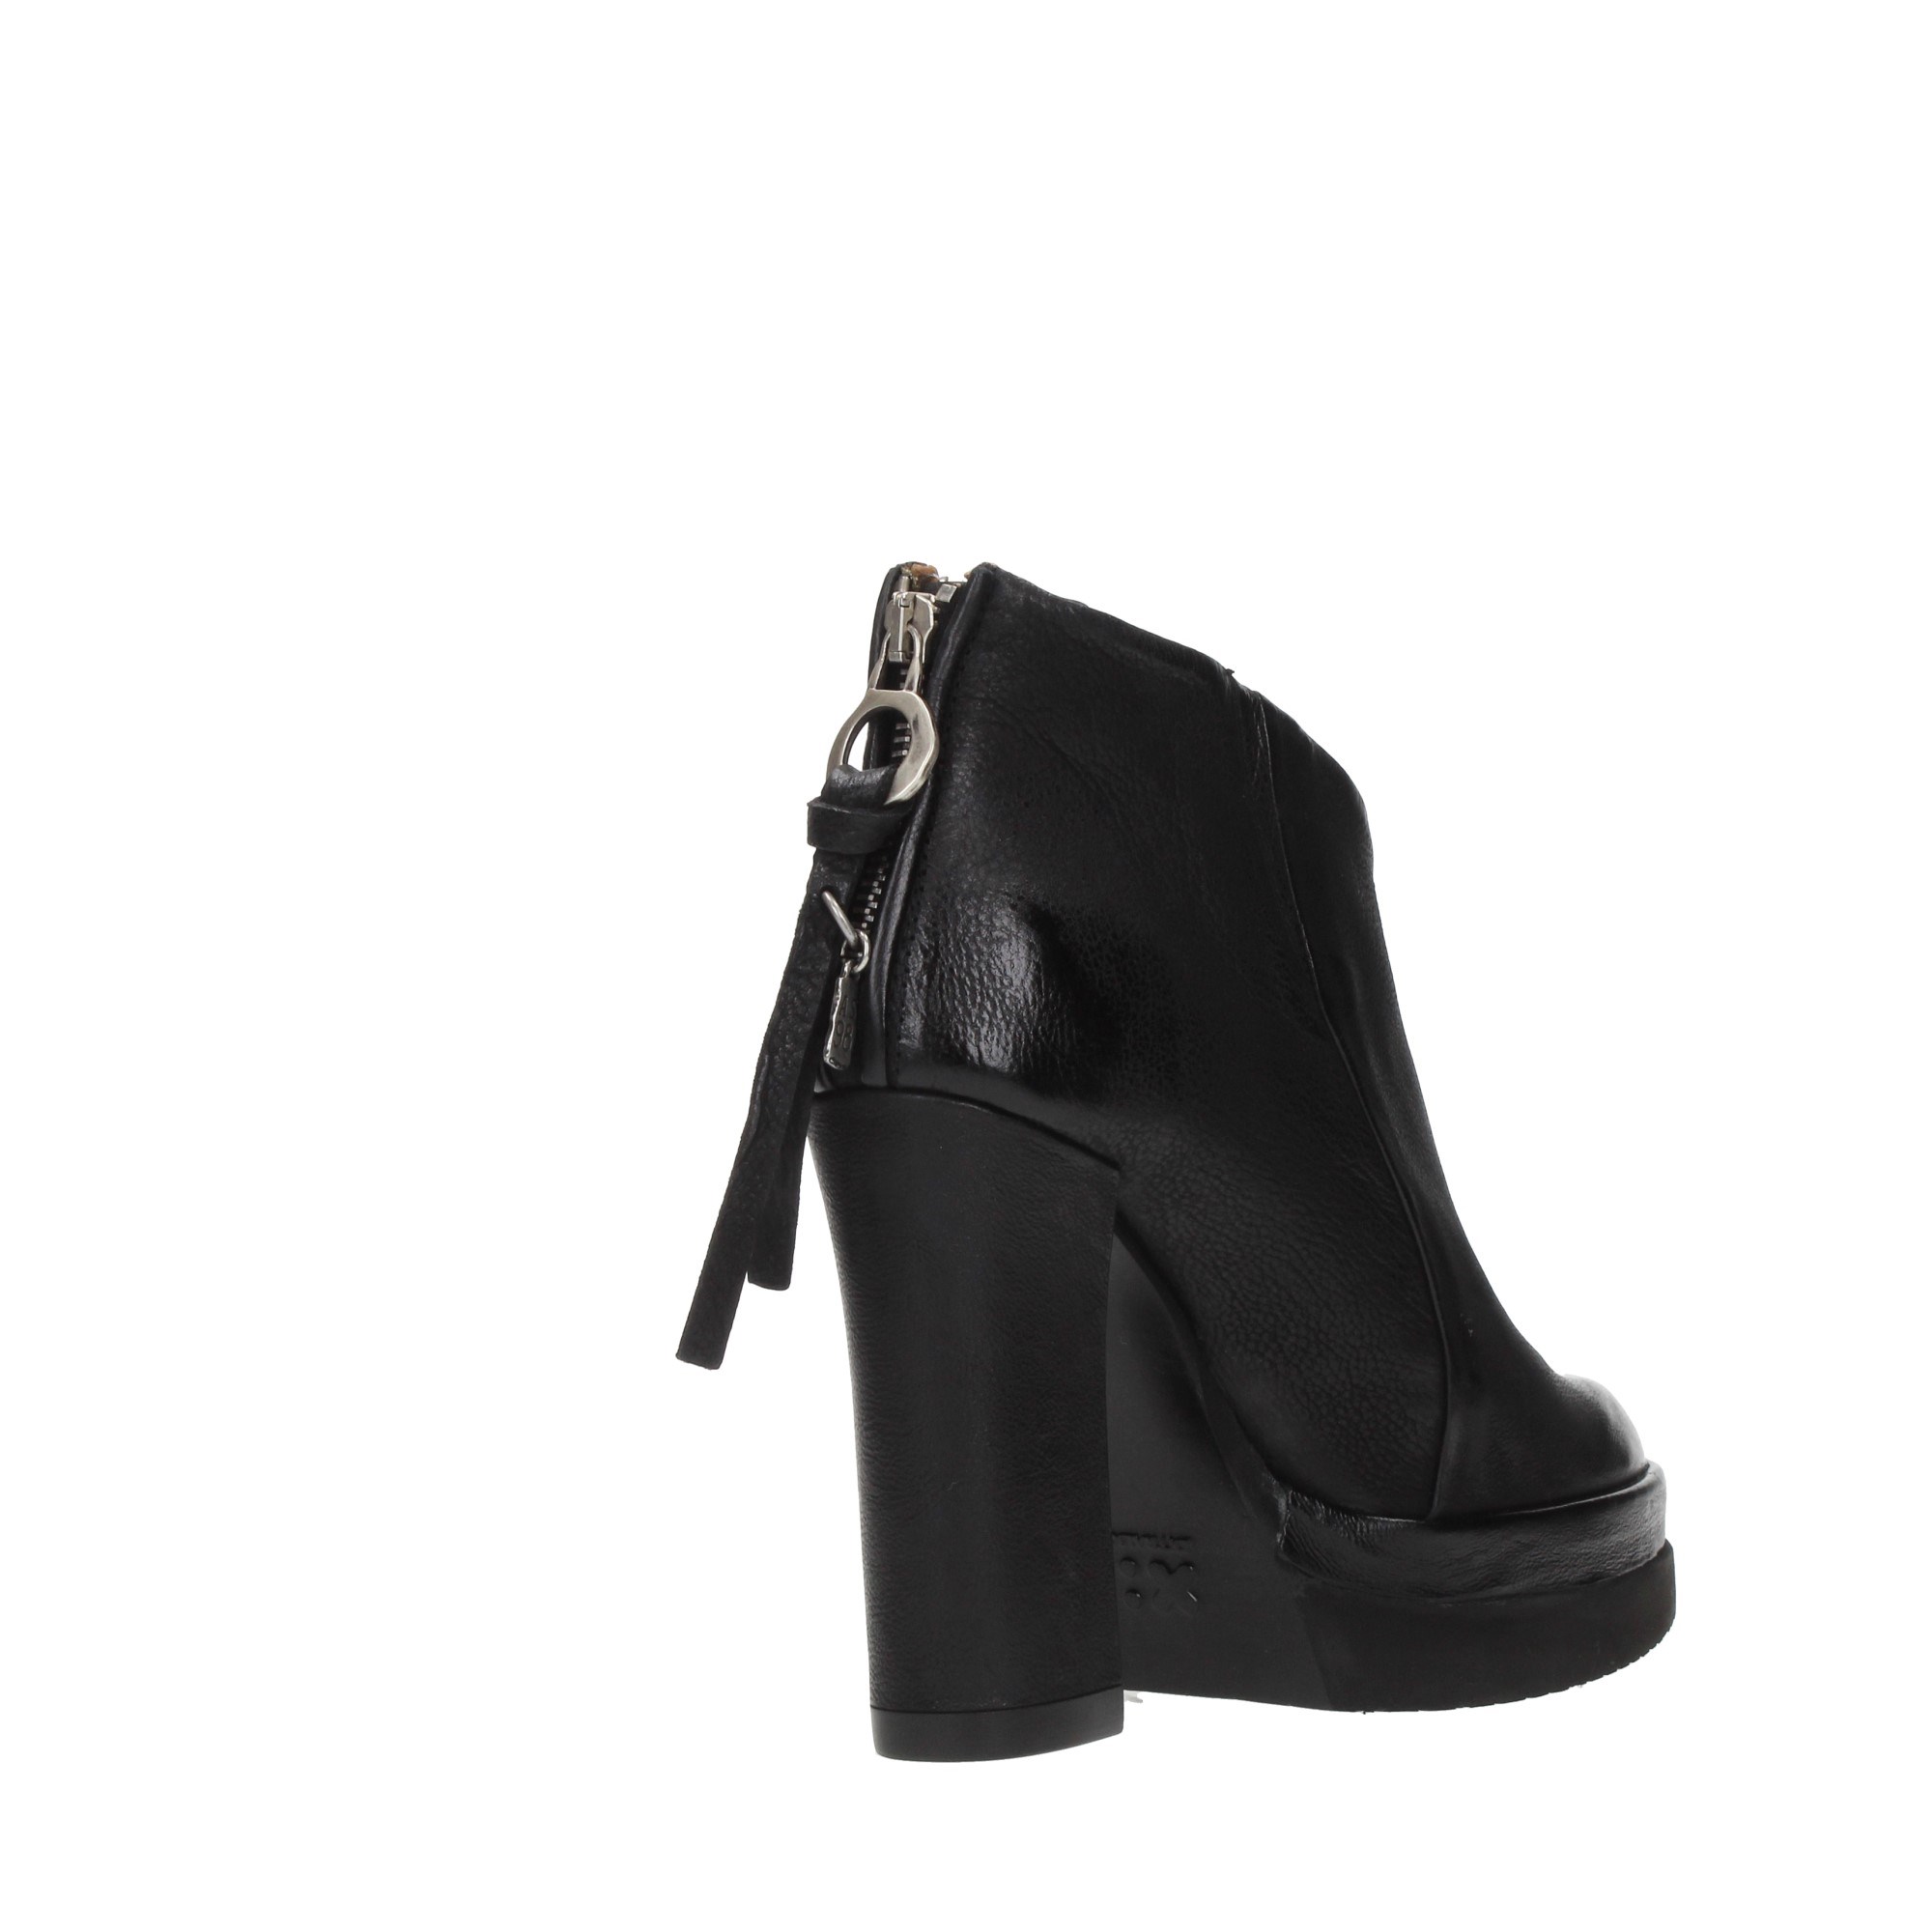 As98 Shoes Women Booties A53204